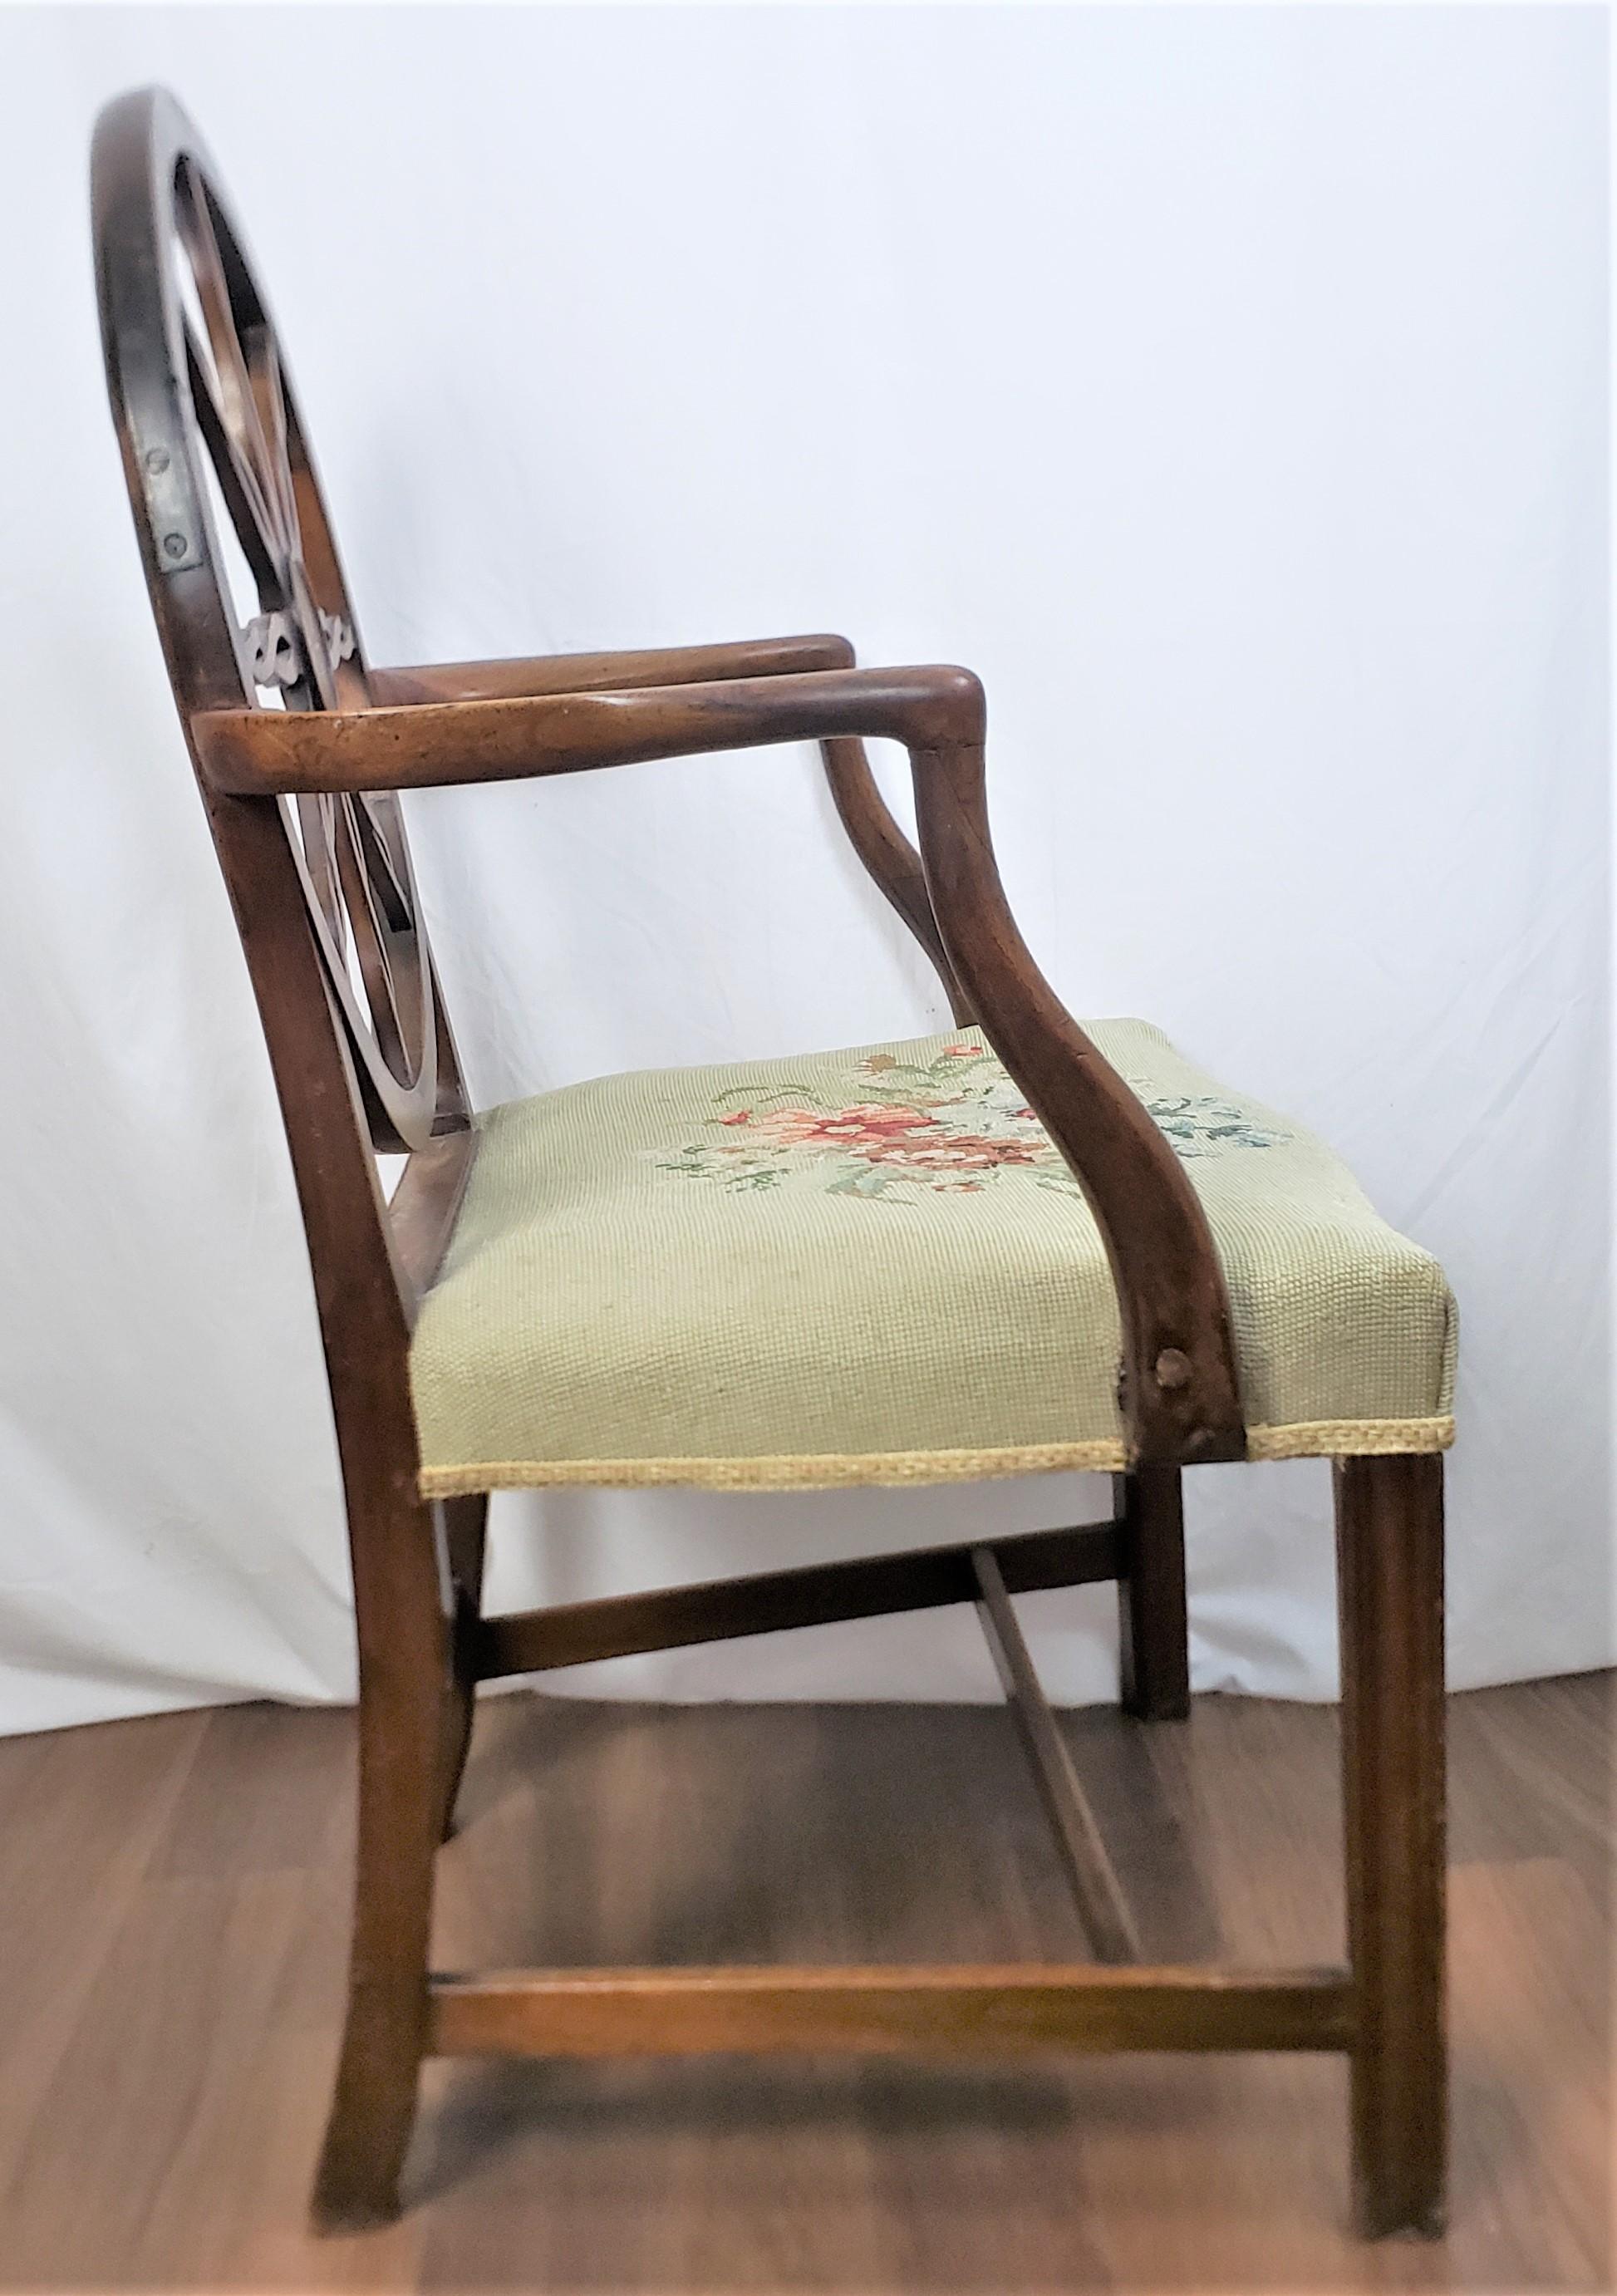 18th Century Antique King George III Period Wheelback Armchair or Side Chair Frame For Sale